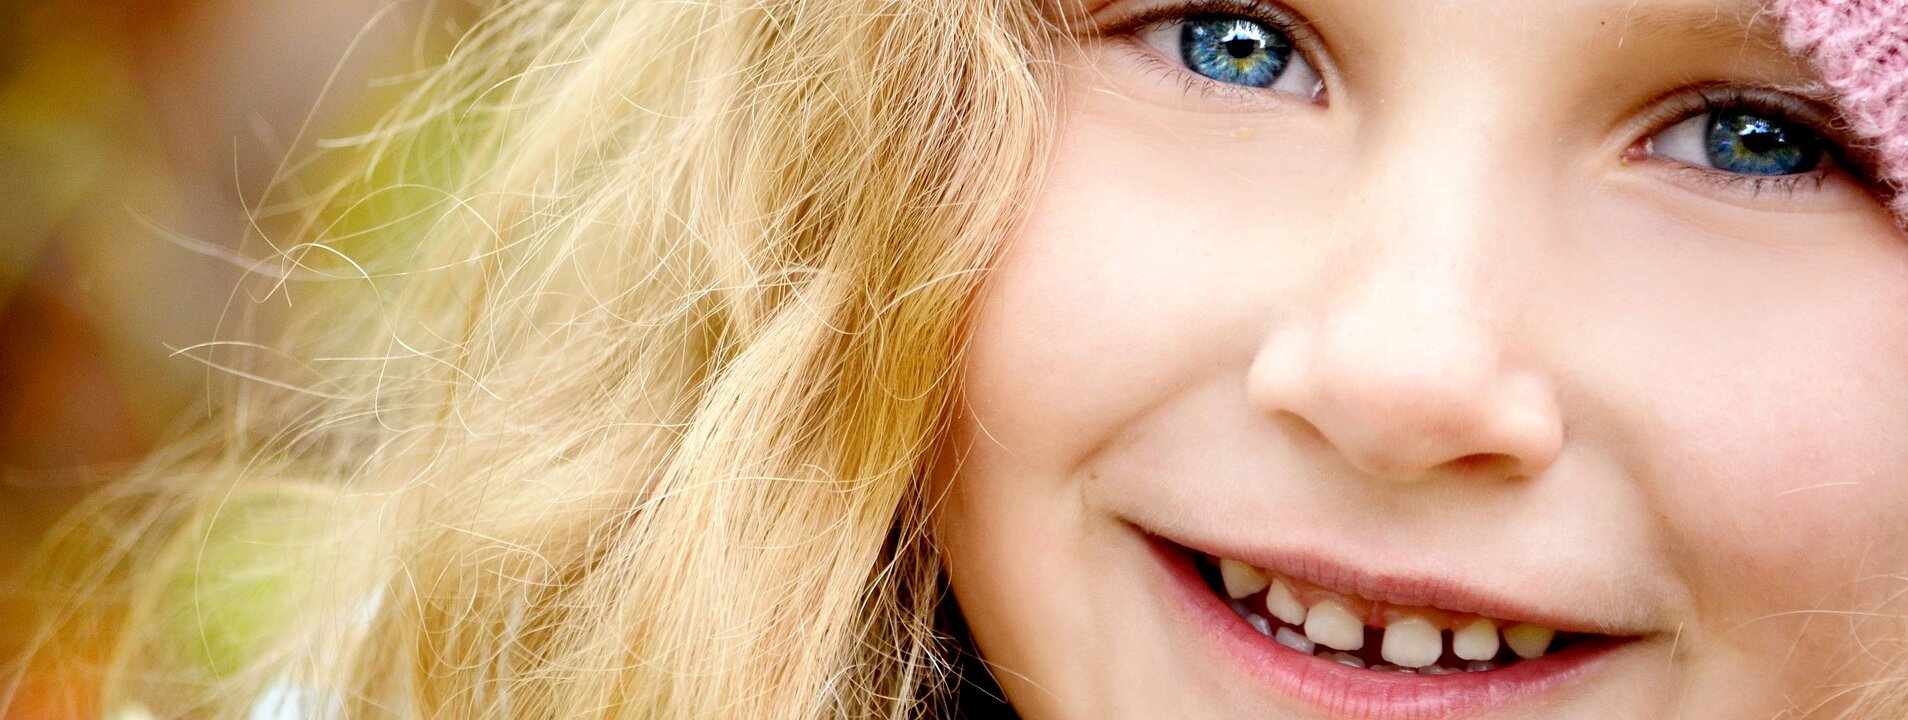 A close shot of a young girl smiling